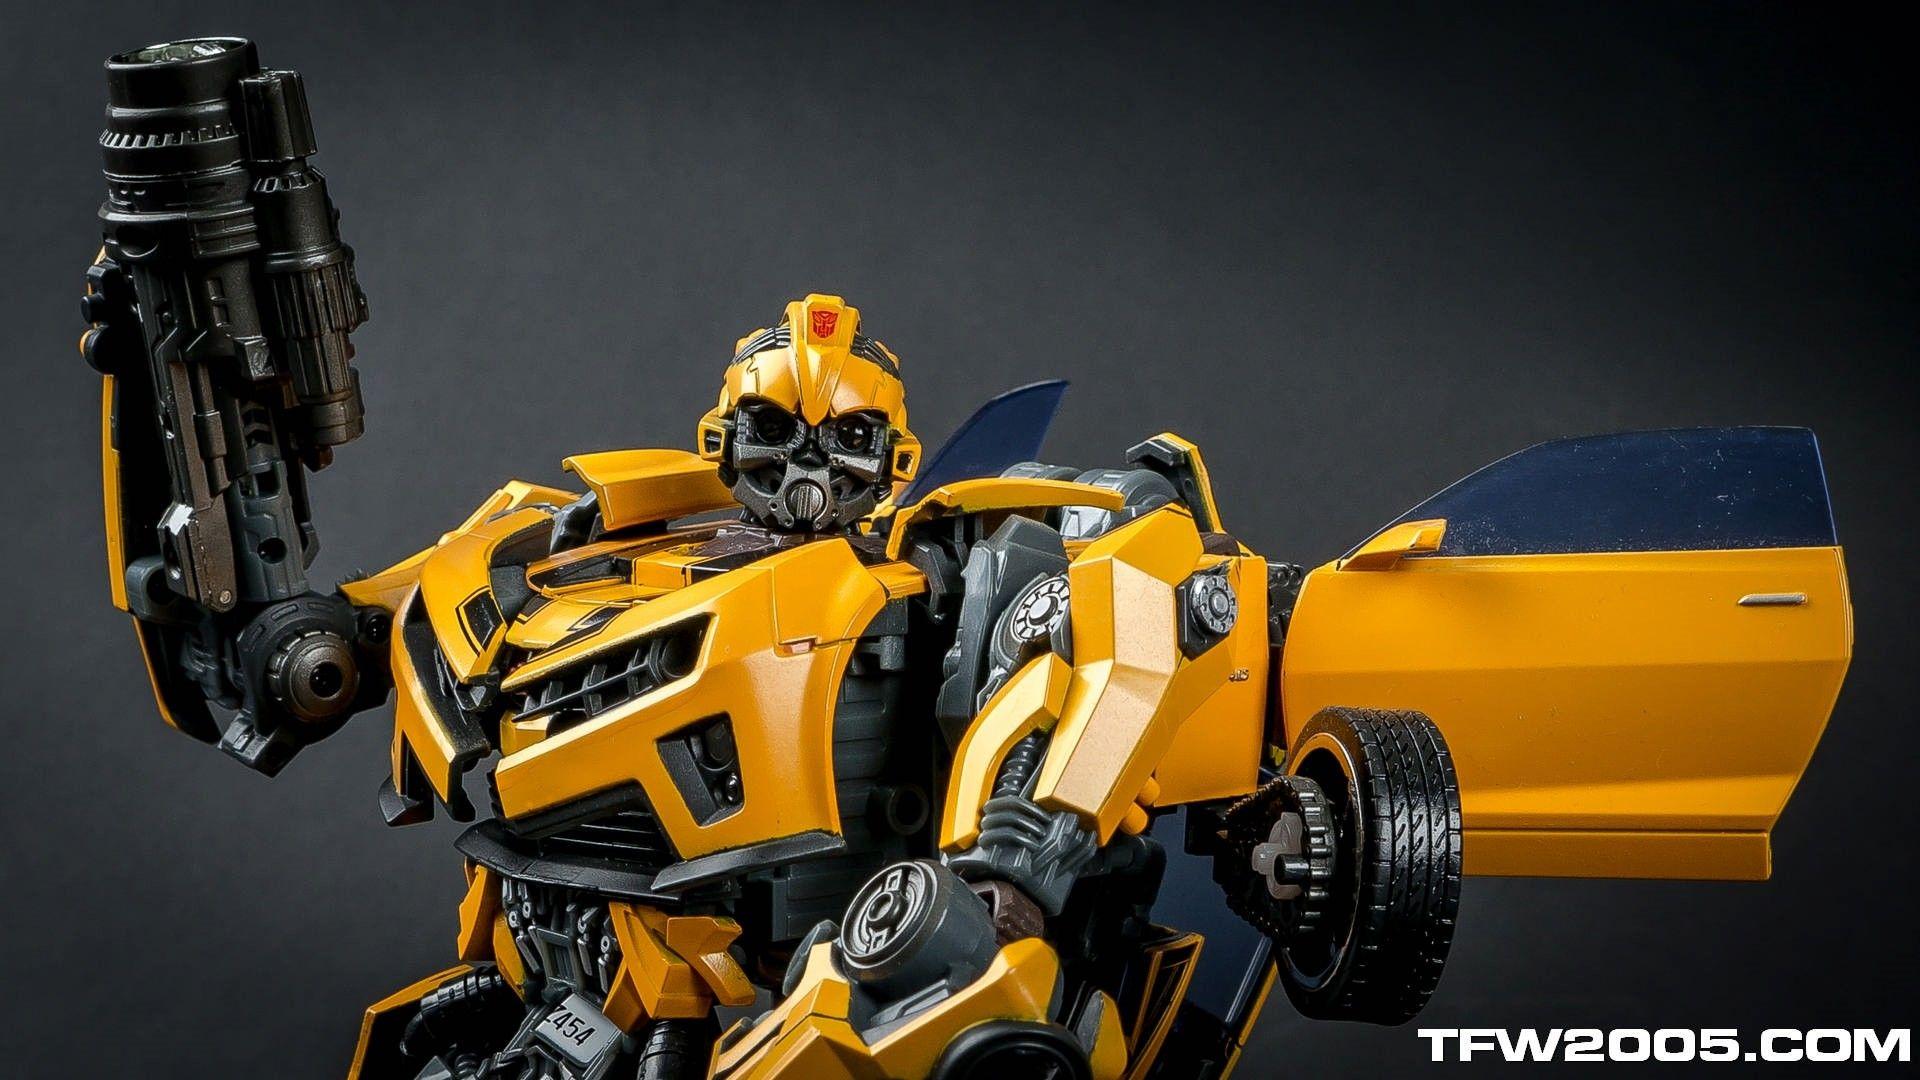 Transformers Cars Wallpapers - Wallpaper Cave